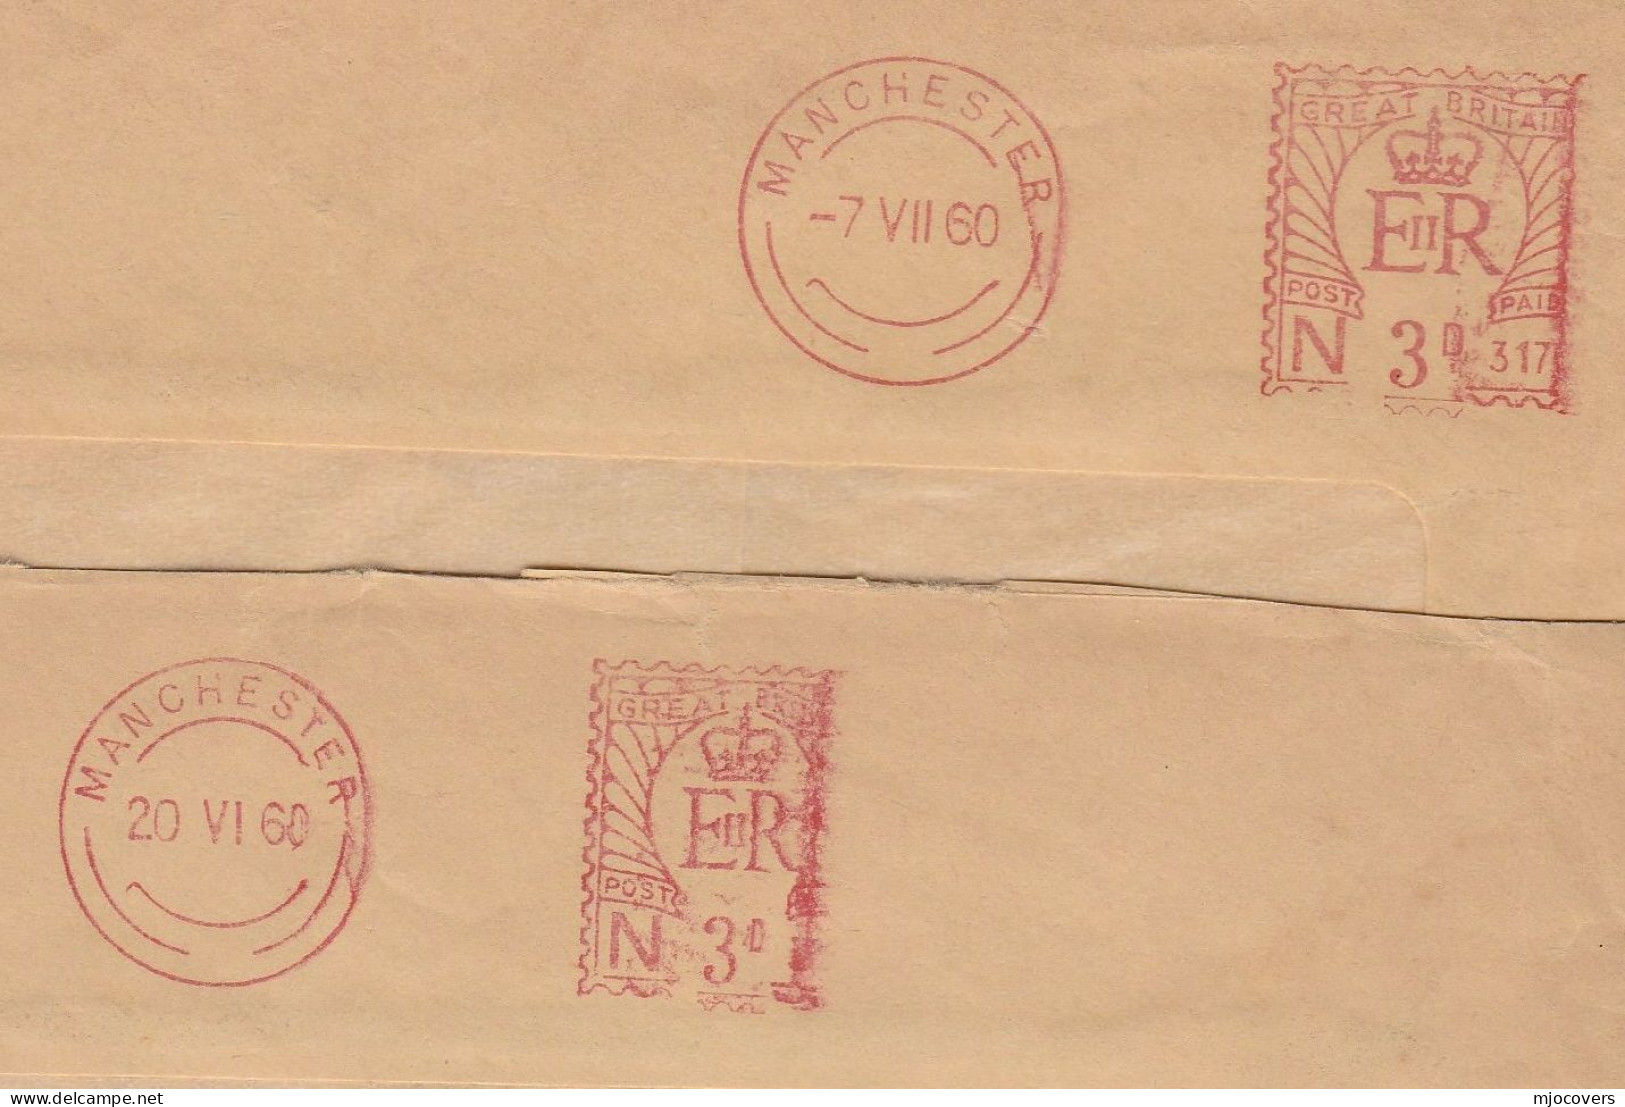 2 1960 Manchester METER COVERS N317 &  Mis- Applied Meter , James Laing Son Ltd Cover - Storia Postale